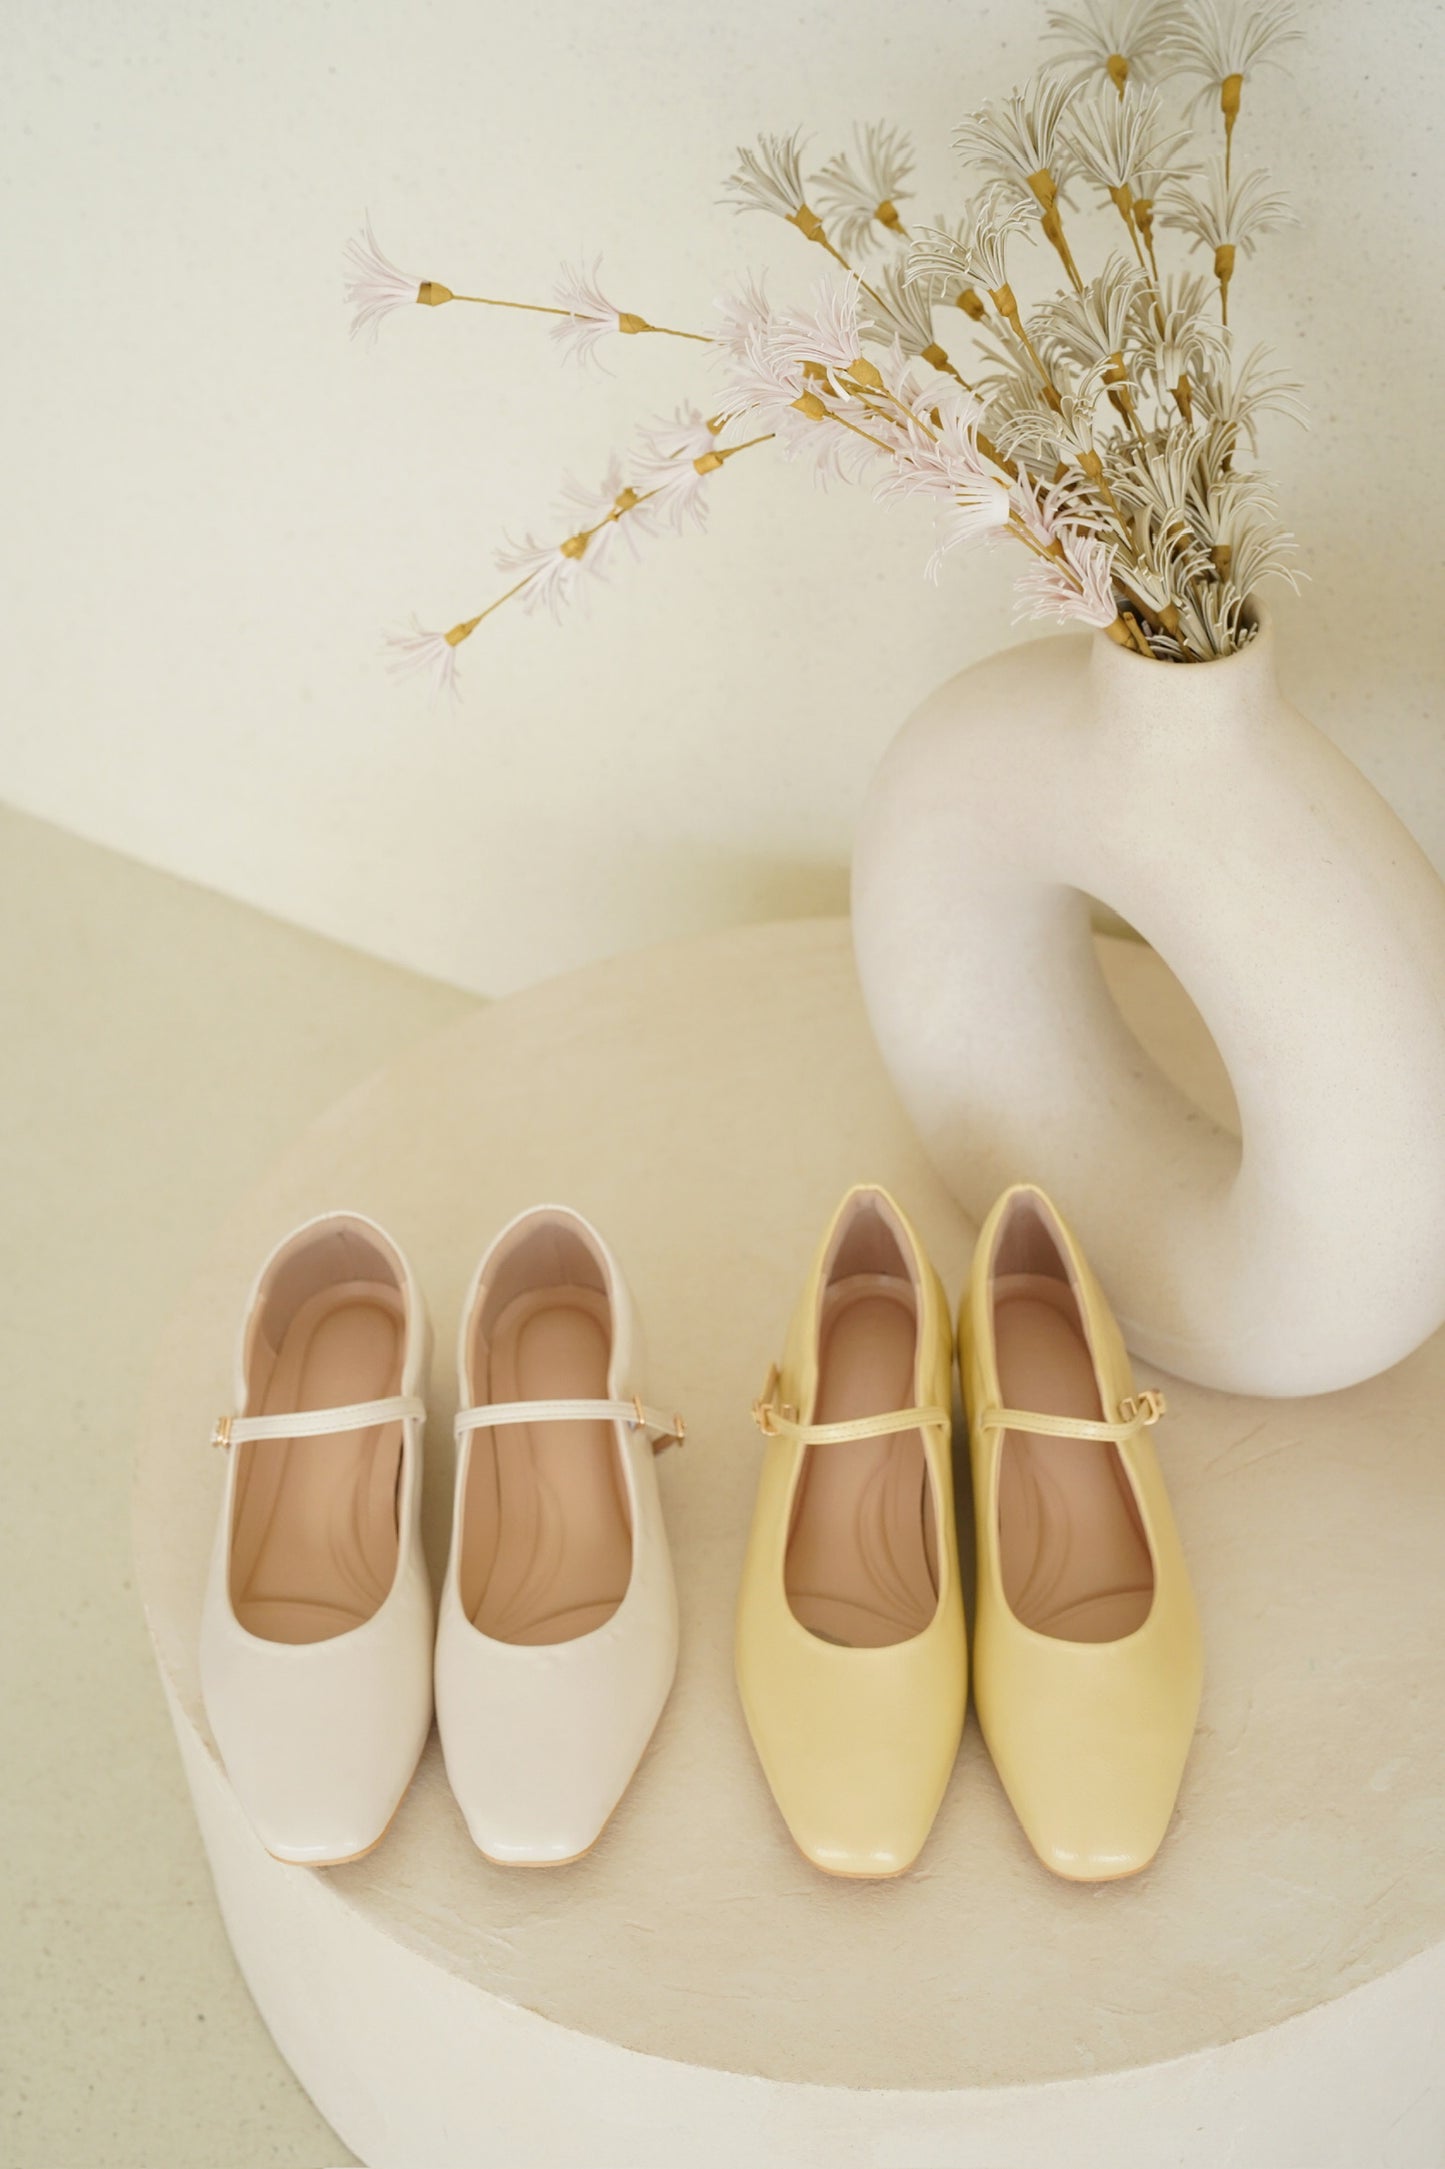 The Pure Spring Low-heels